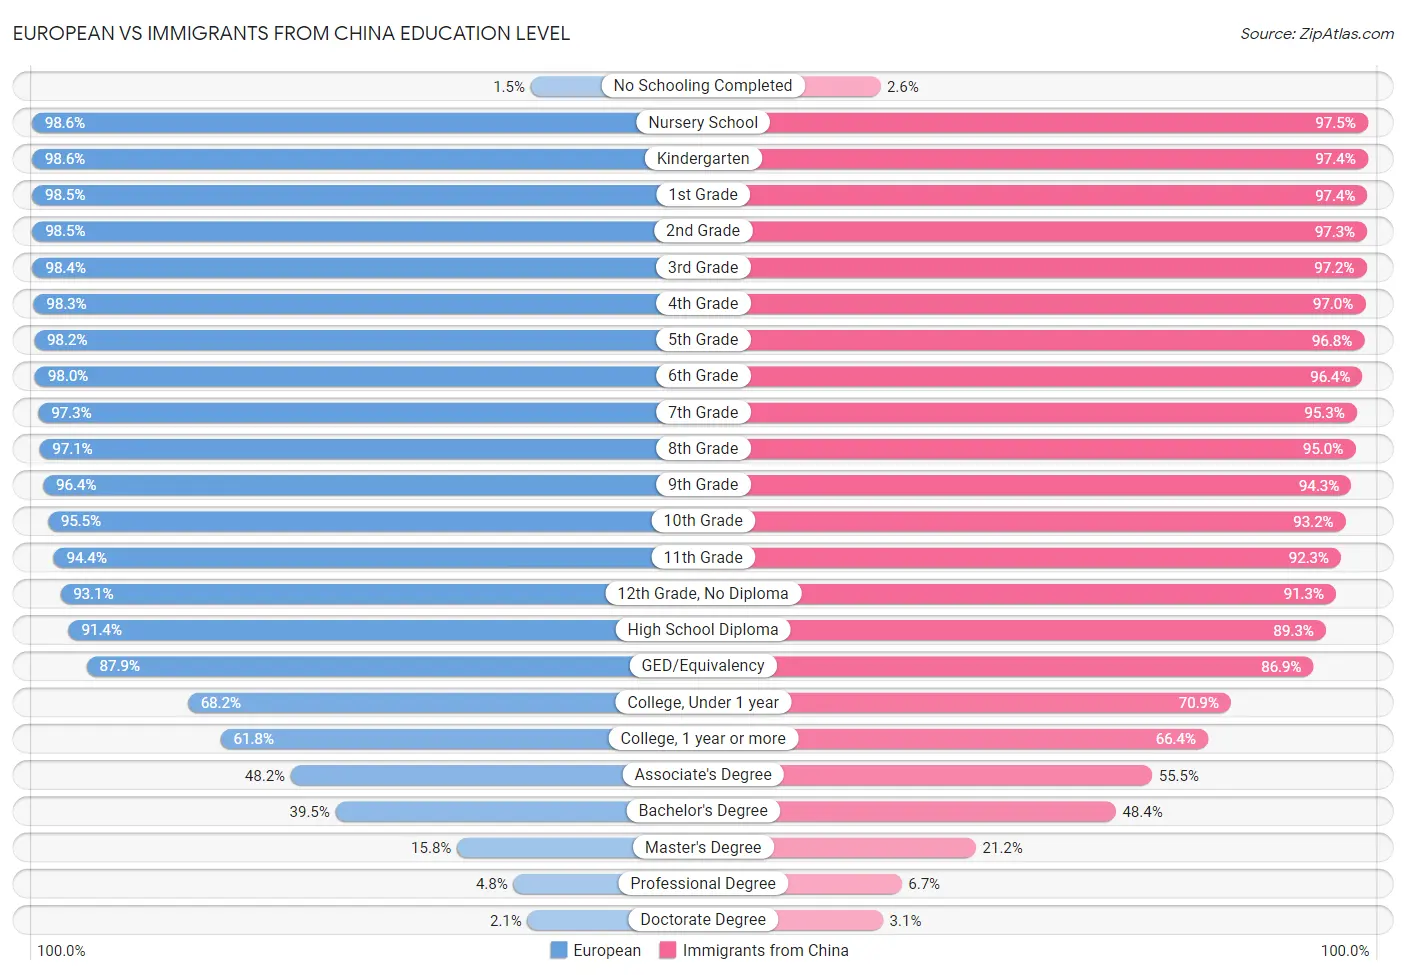 European vs Immigrants from China Education Level